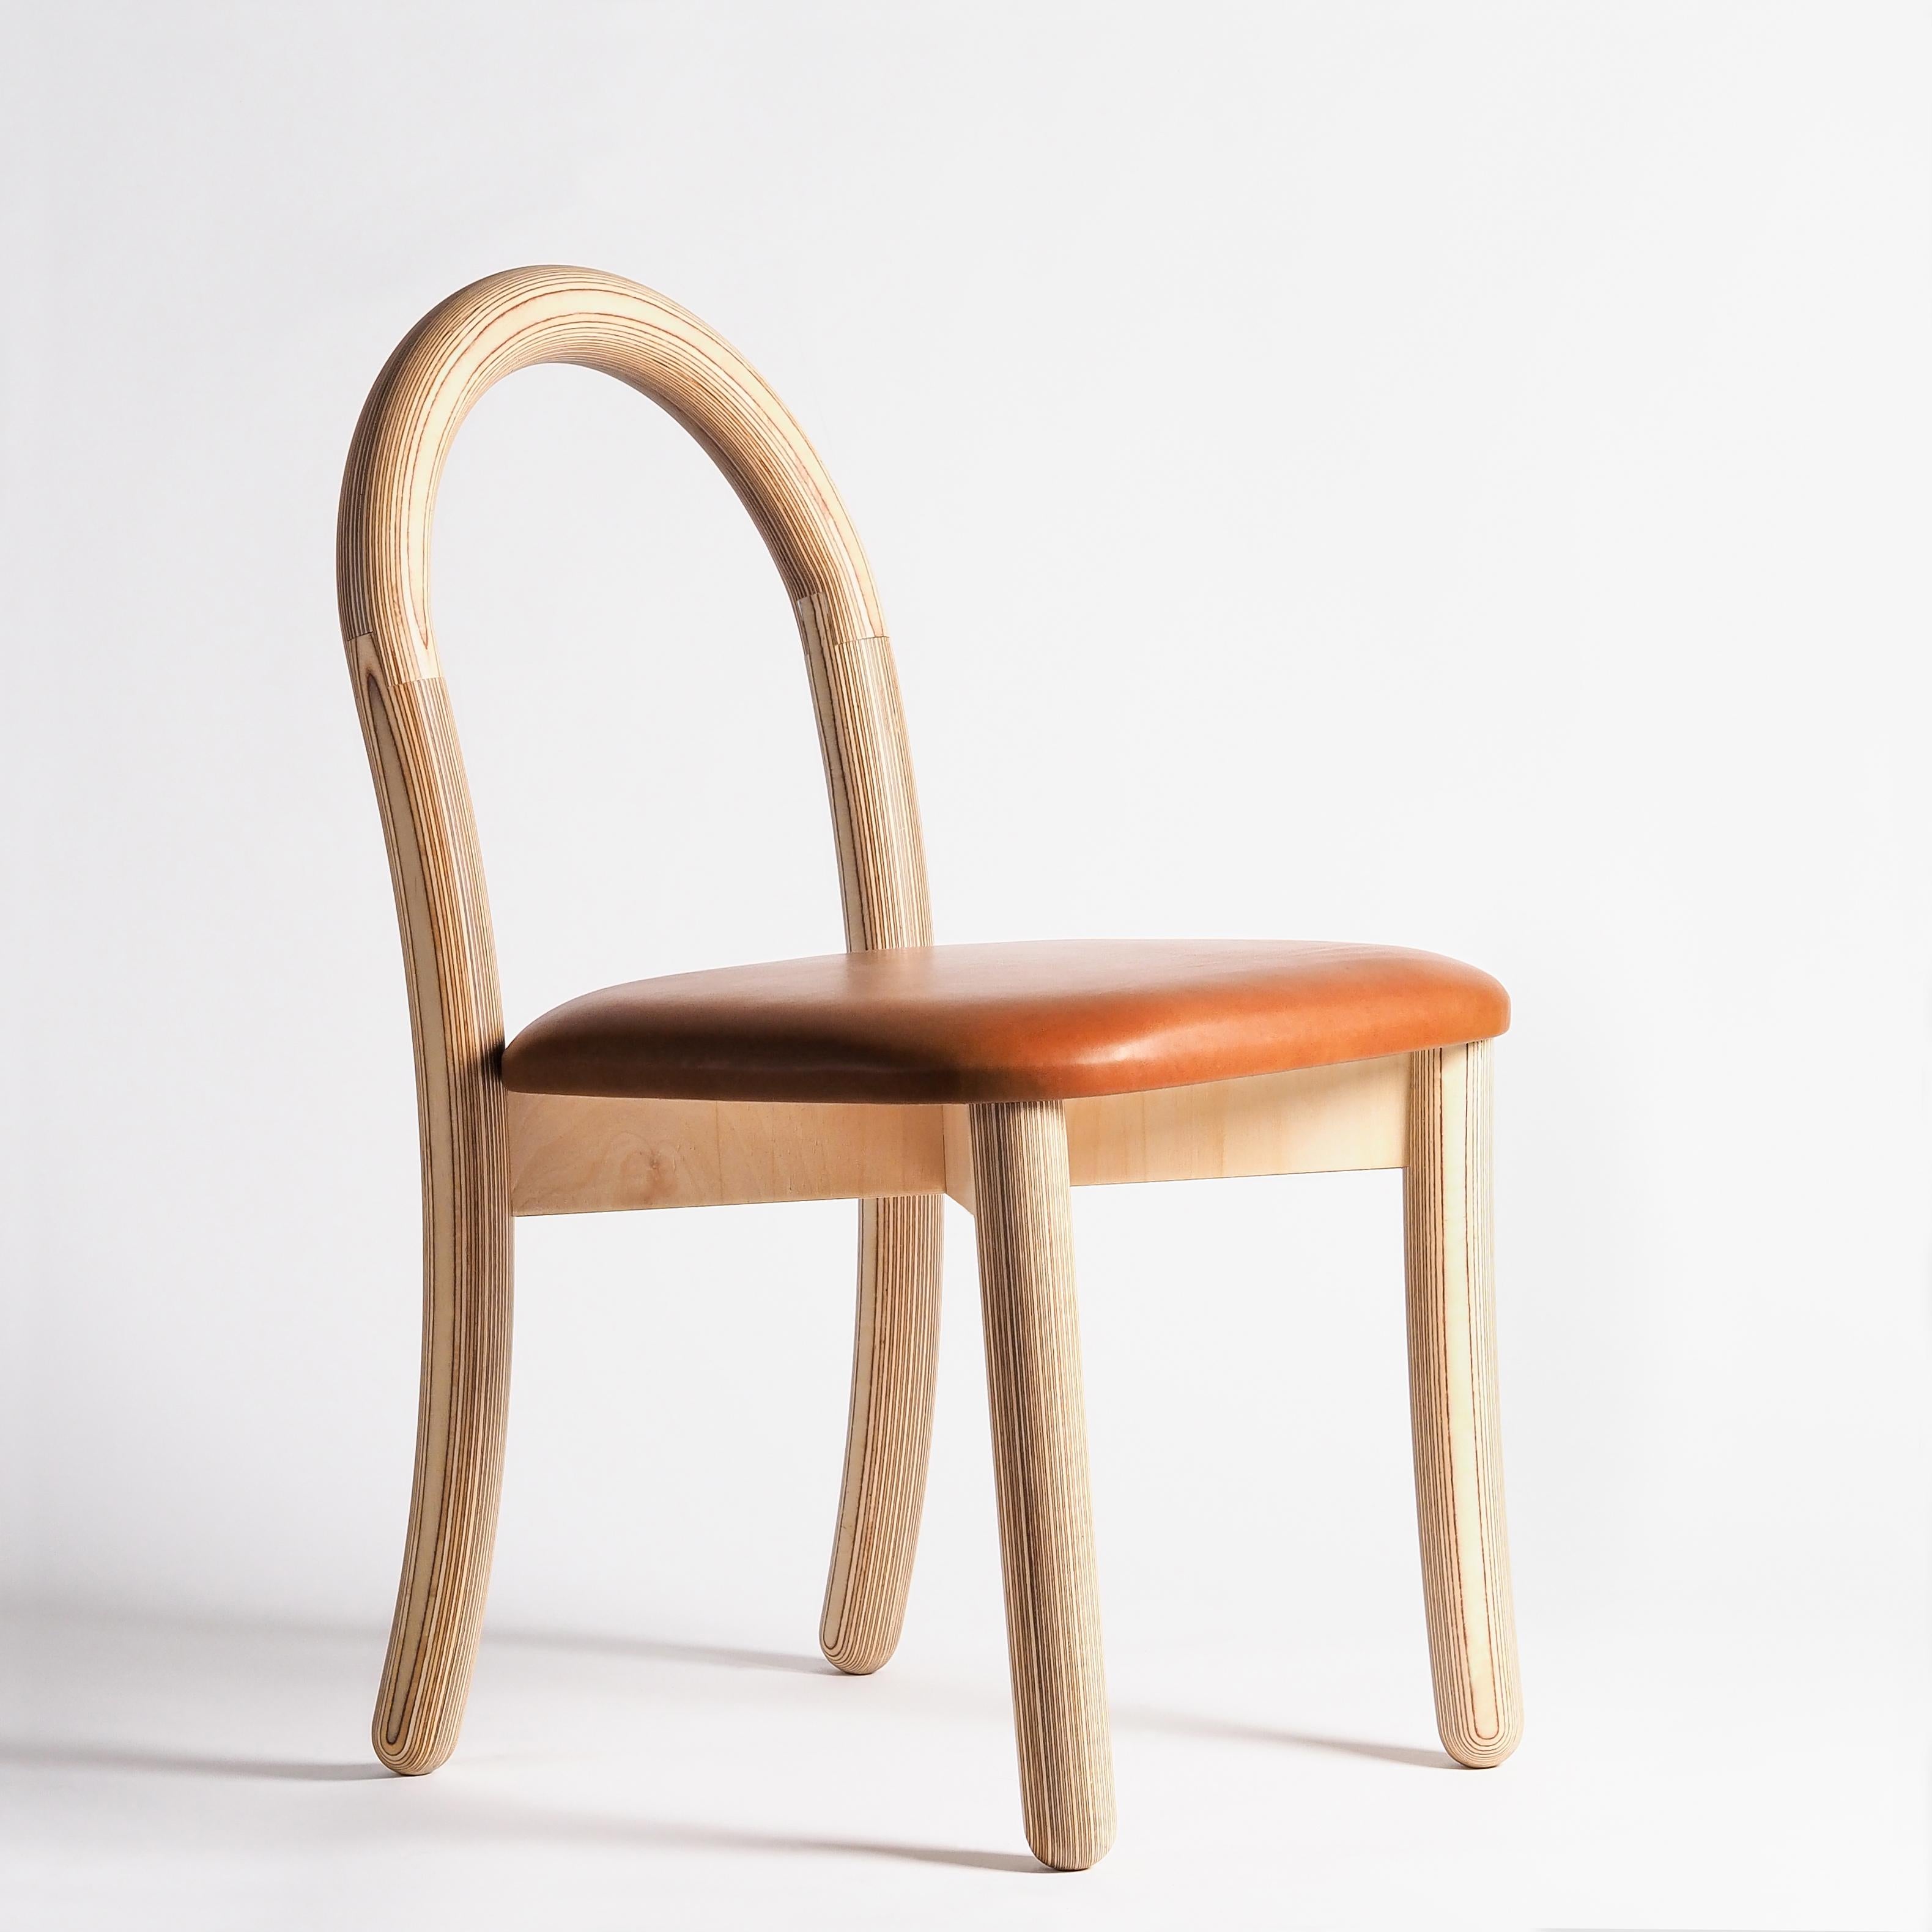 Goma dining chair by Made By Choice with Thomas Sandell
Dimensions: 59 x 55 x 80 cm
Materials: plywood

Also available: Upholstery in fabric or leather (category 1 & 3), goma bar chair, and goma armchair.

The barstool GOMA was created for a